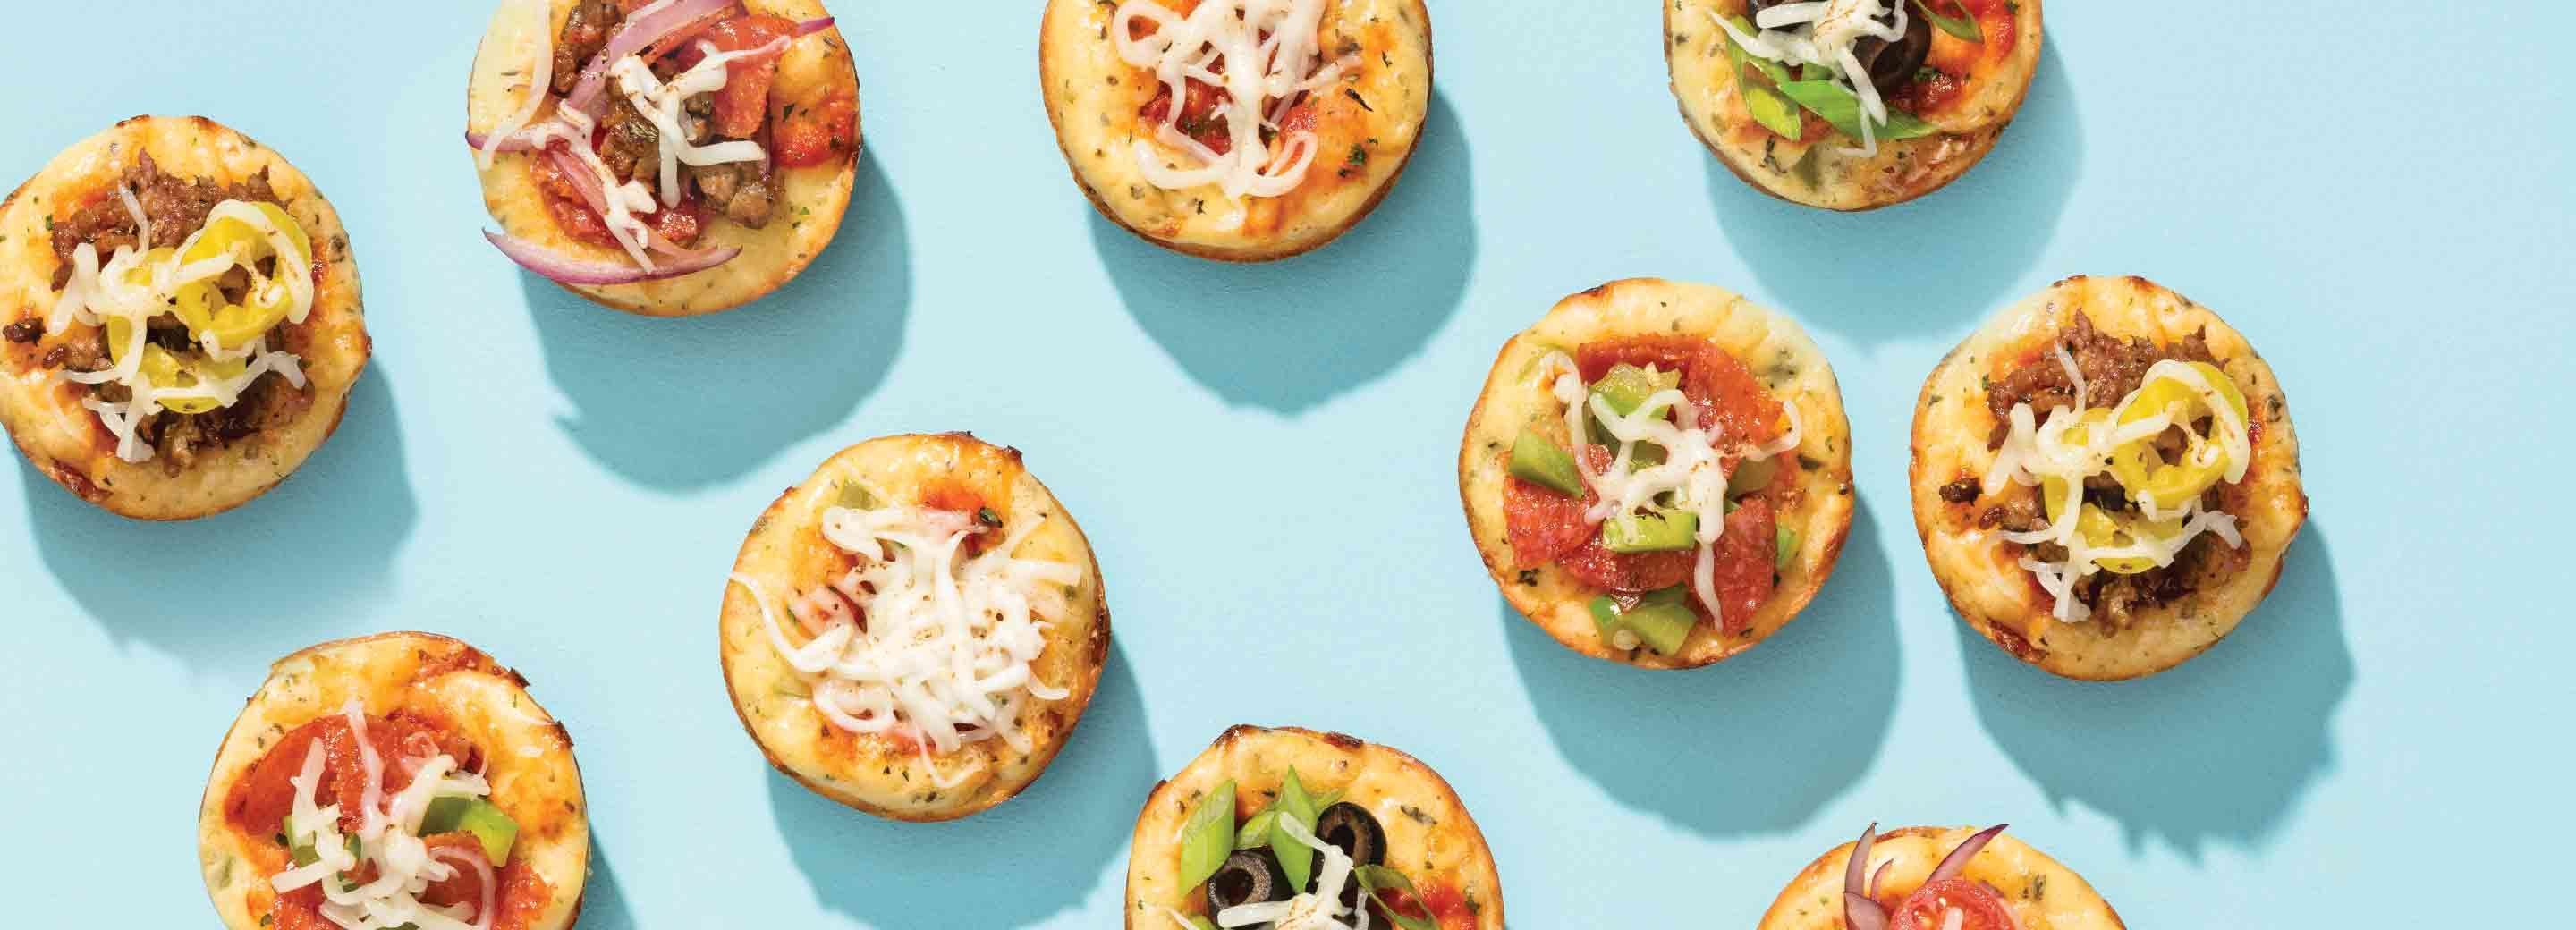 Meal-in-a-Muffin Pizza Bites